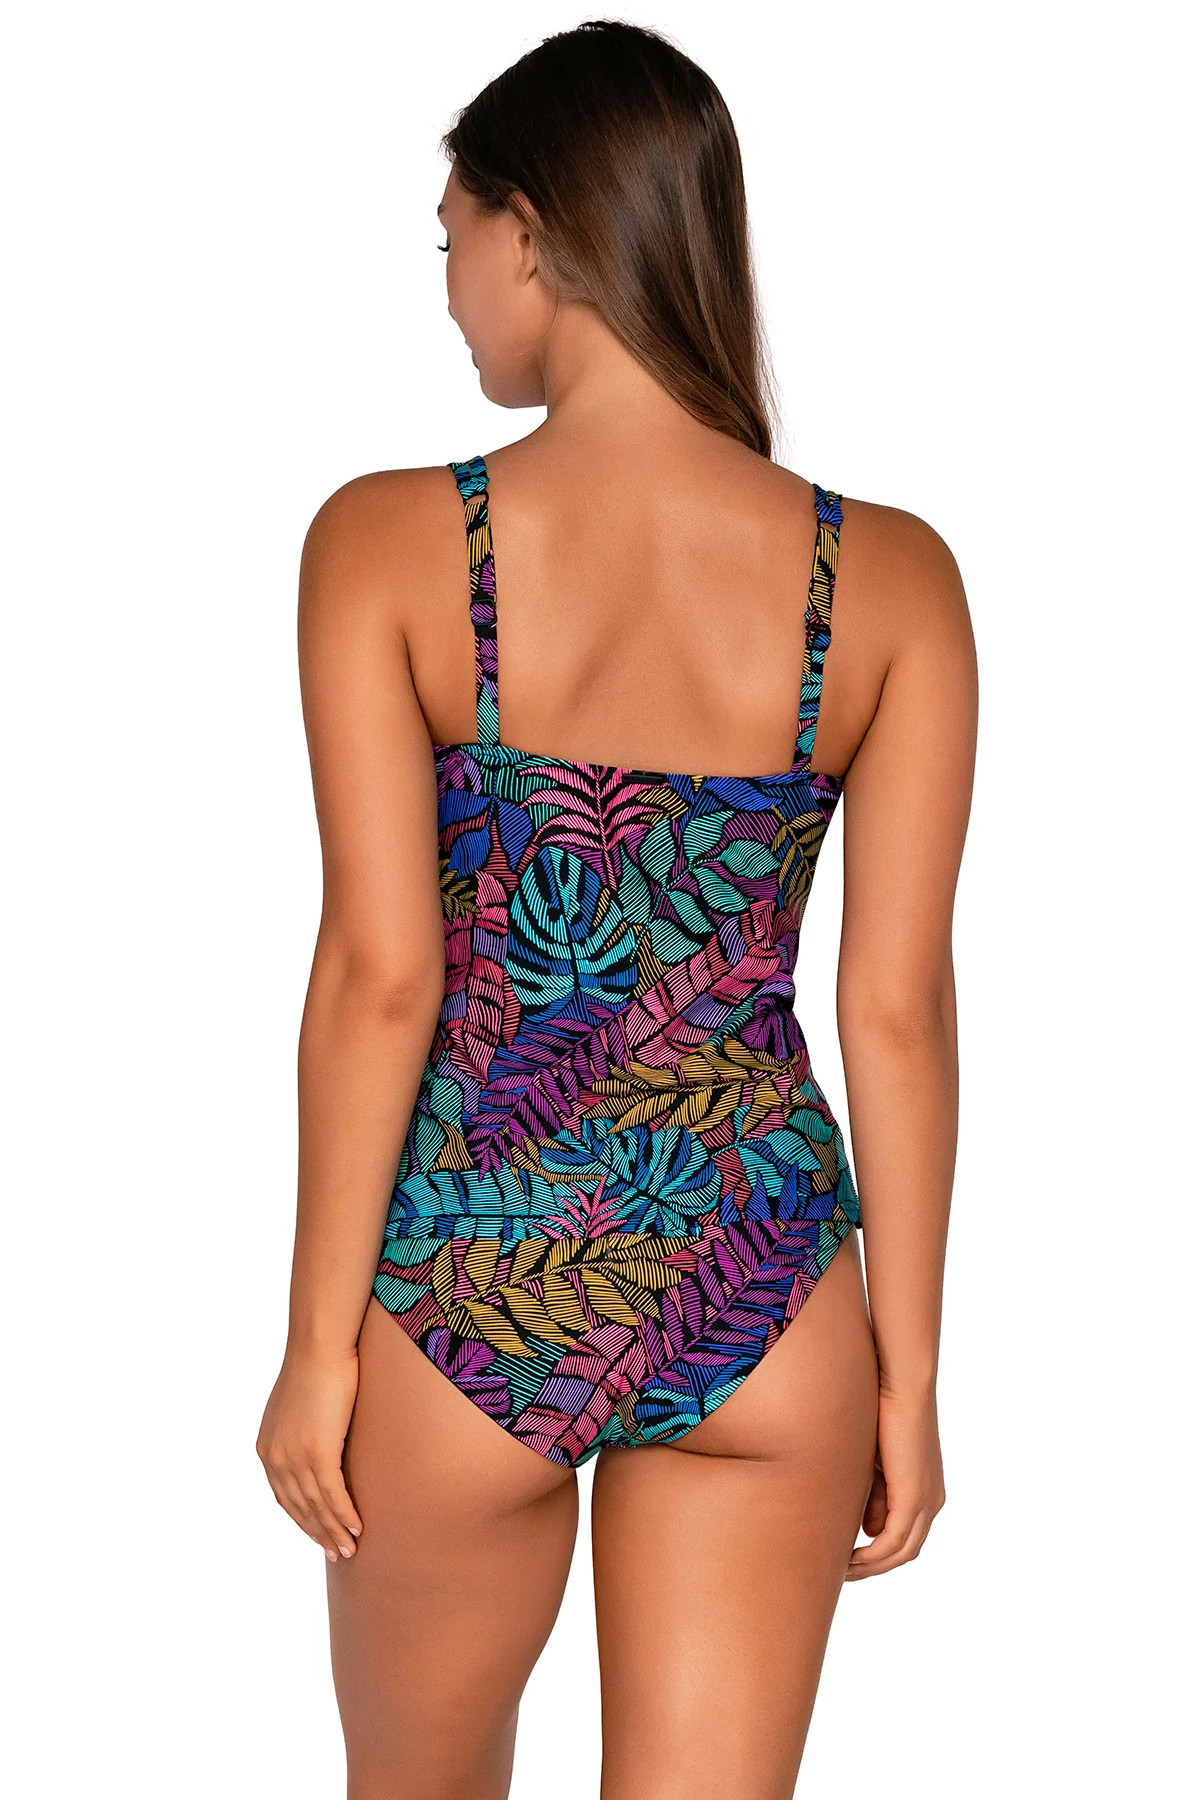 PANAMA PALMS Taylor Underwire Tankini Top (D+ Cup) image number 2